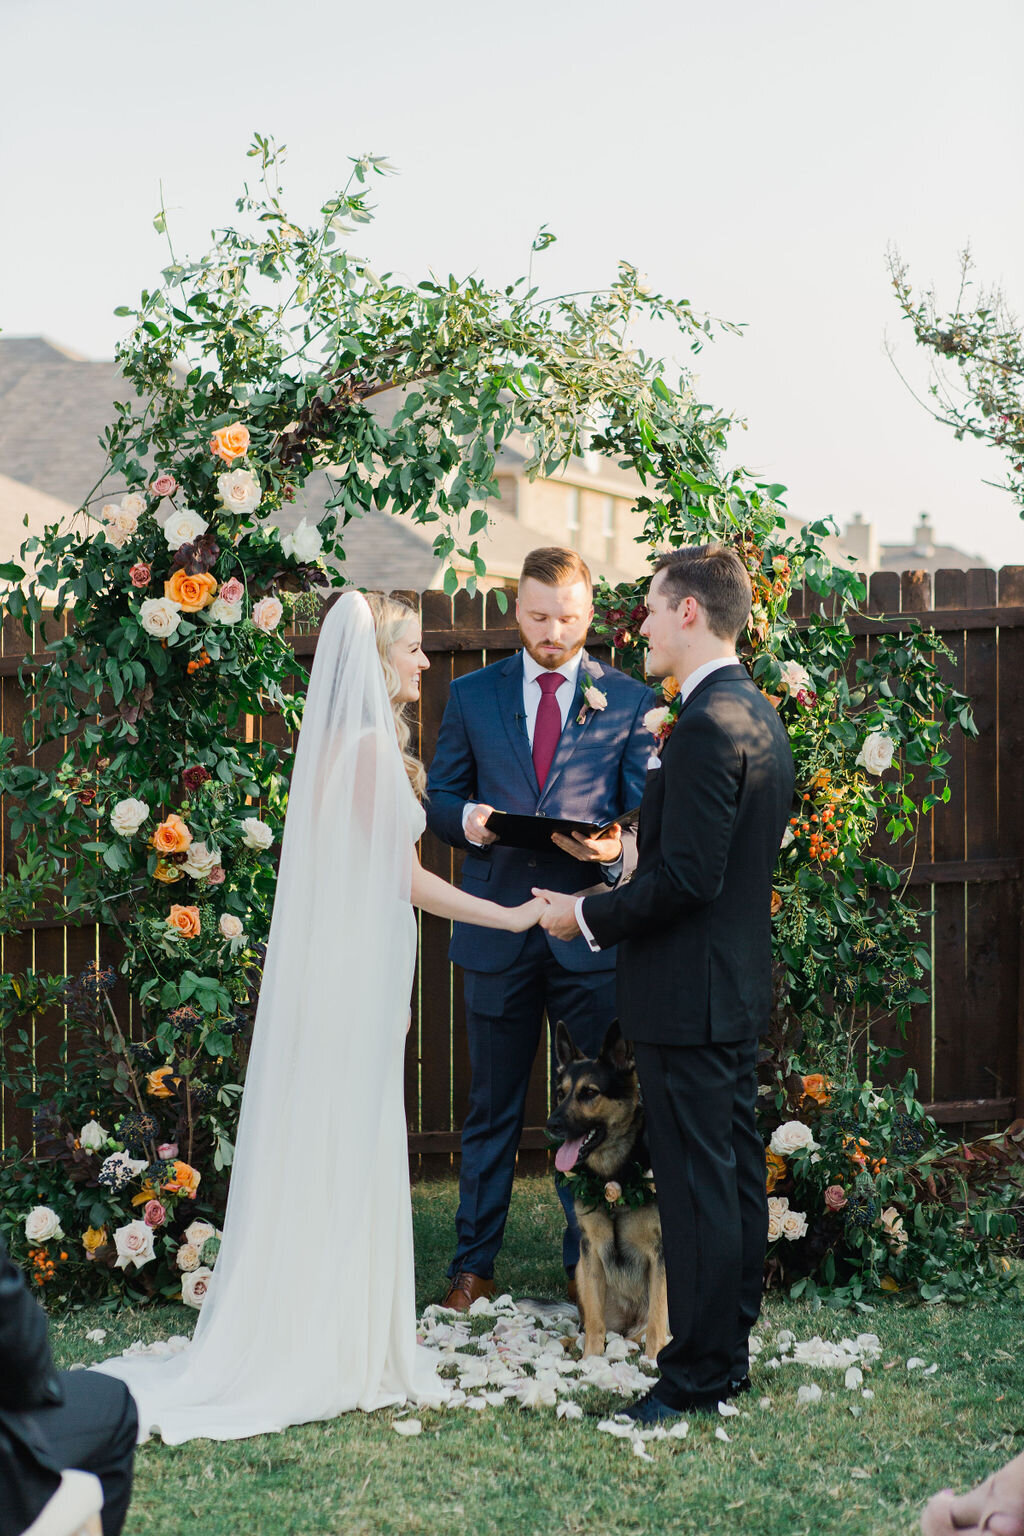 Intimate Ceremony with florals by best florist in Dallas Fort Worth, Vella Nest Florals